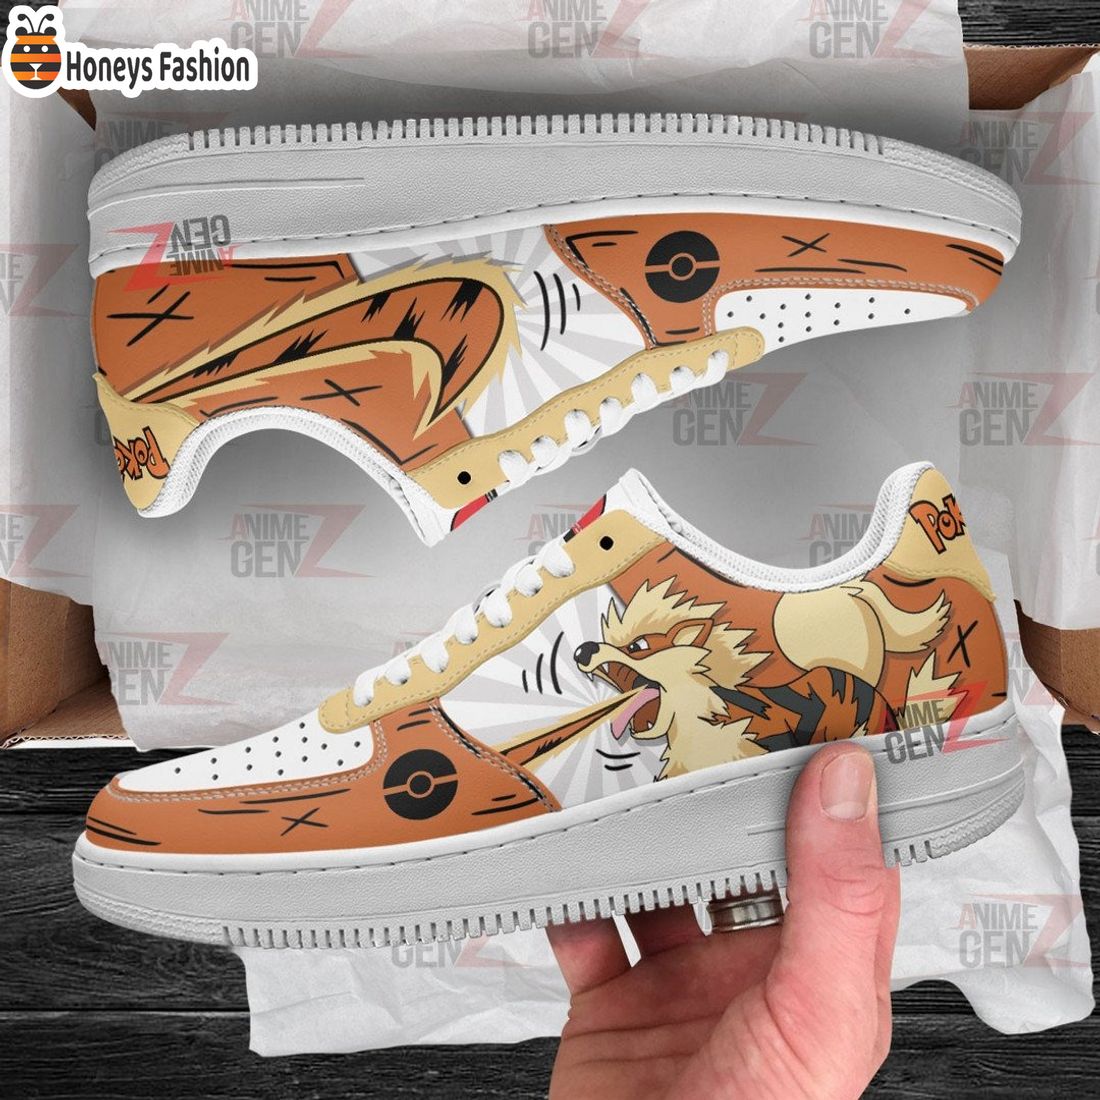 Pokemon Arcanine Air Force 1 Sneakers